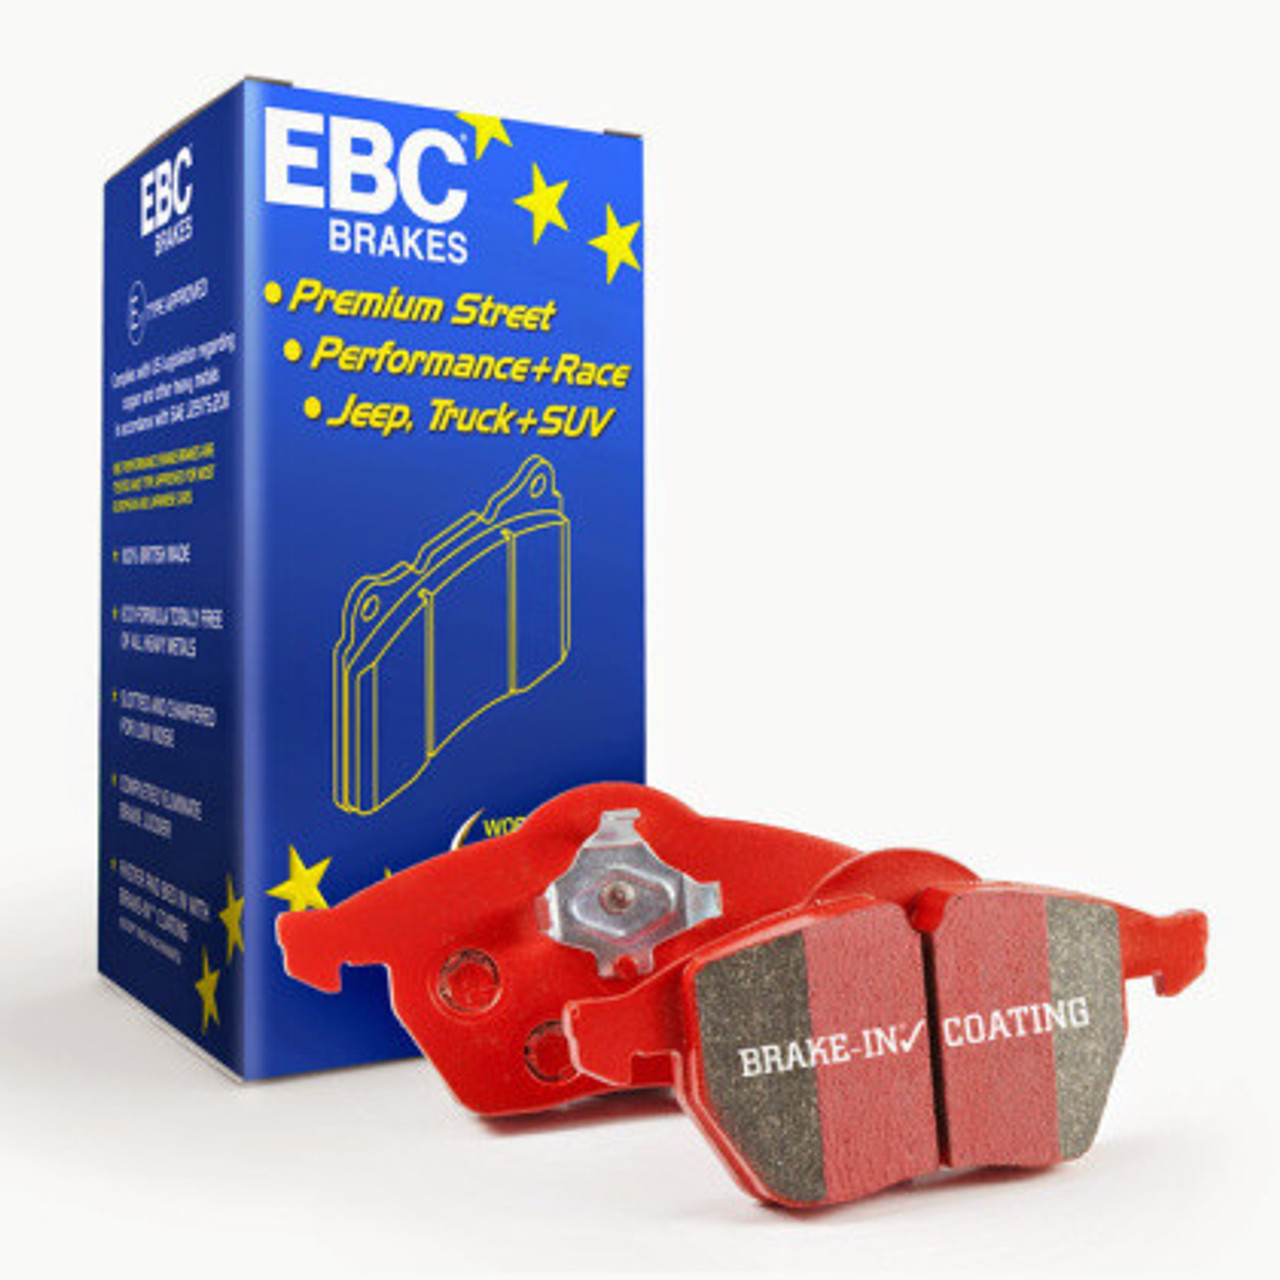 EBC Redstuff Front Brake Pads for B6 S4, B7 A4 & S4